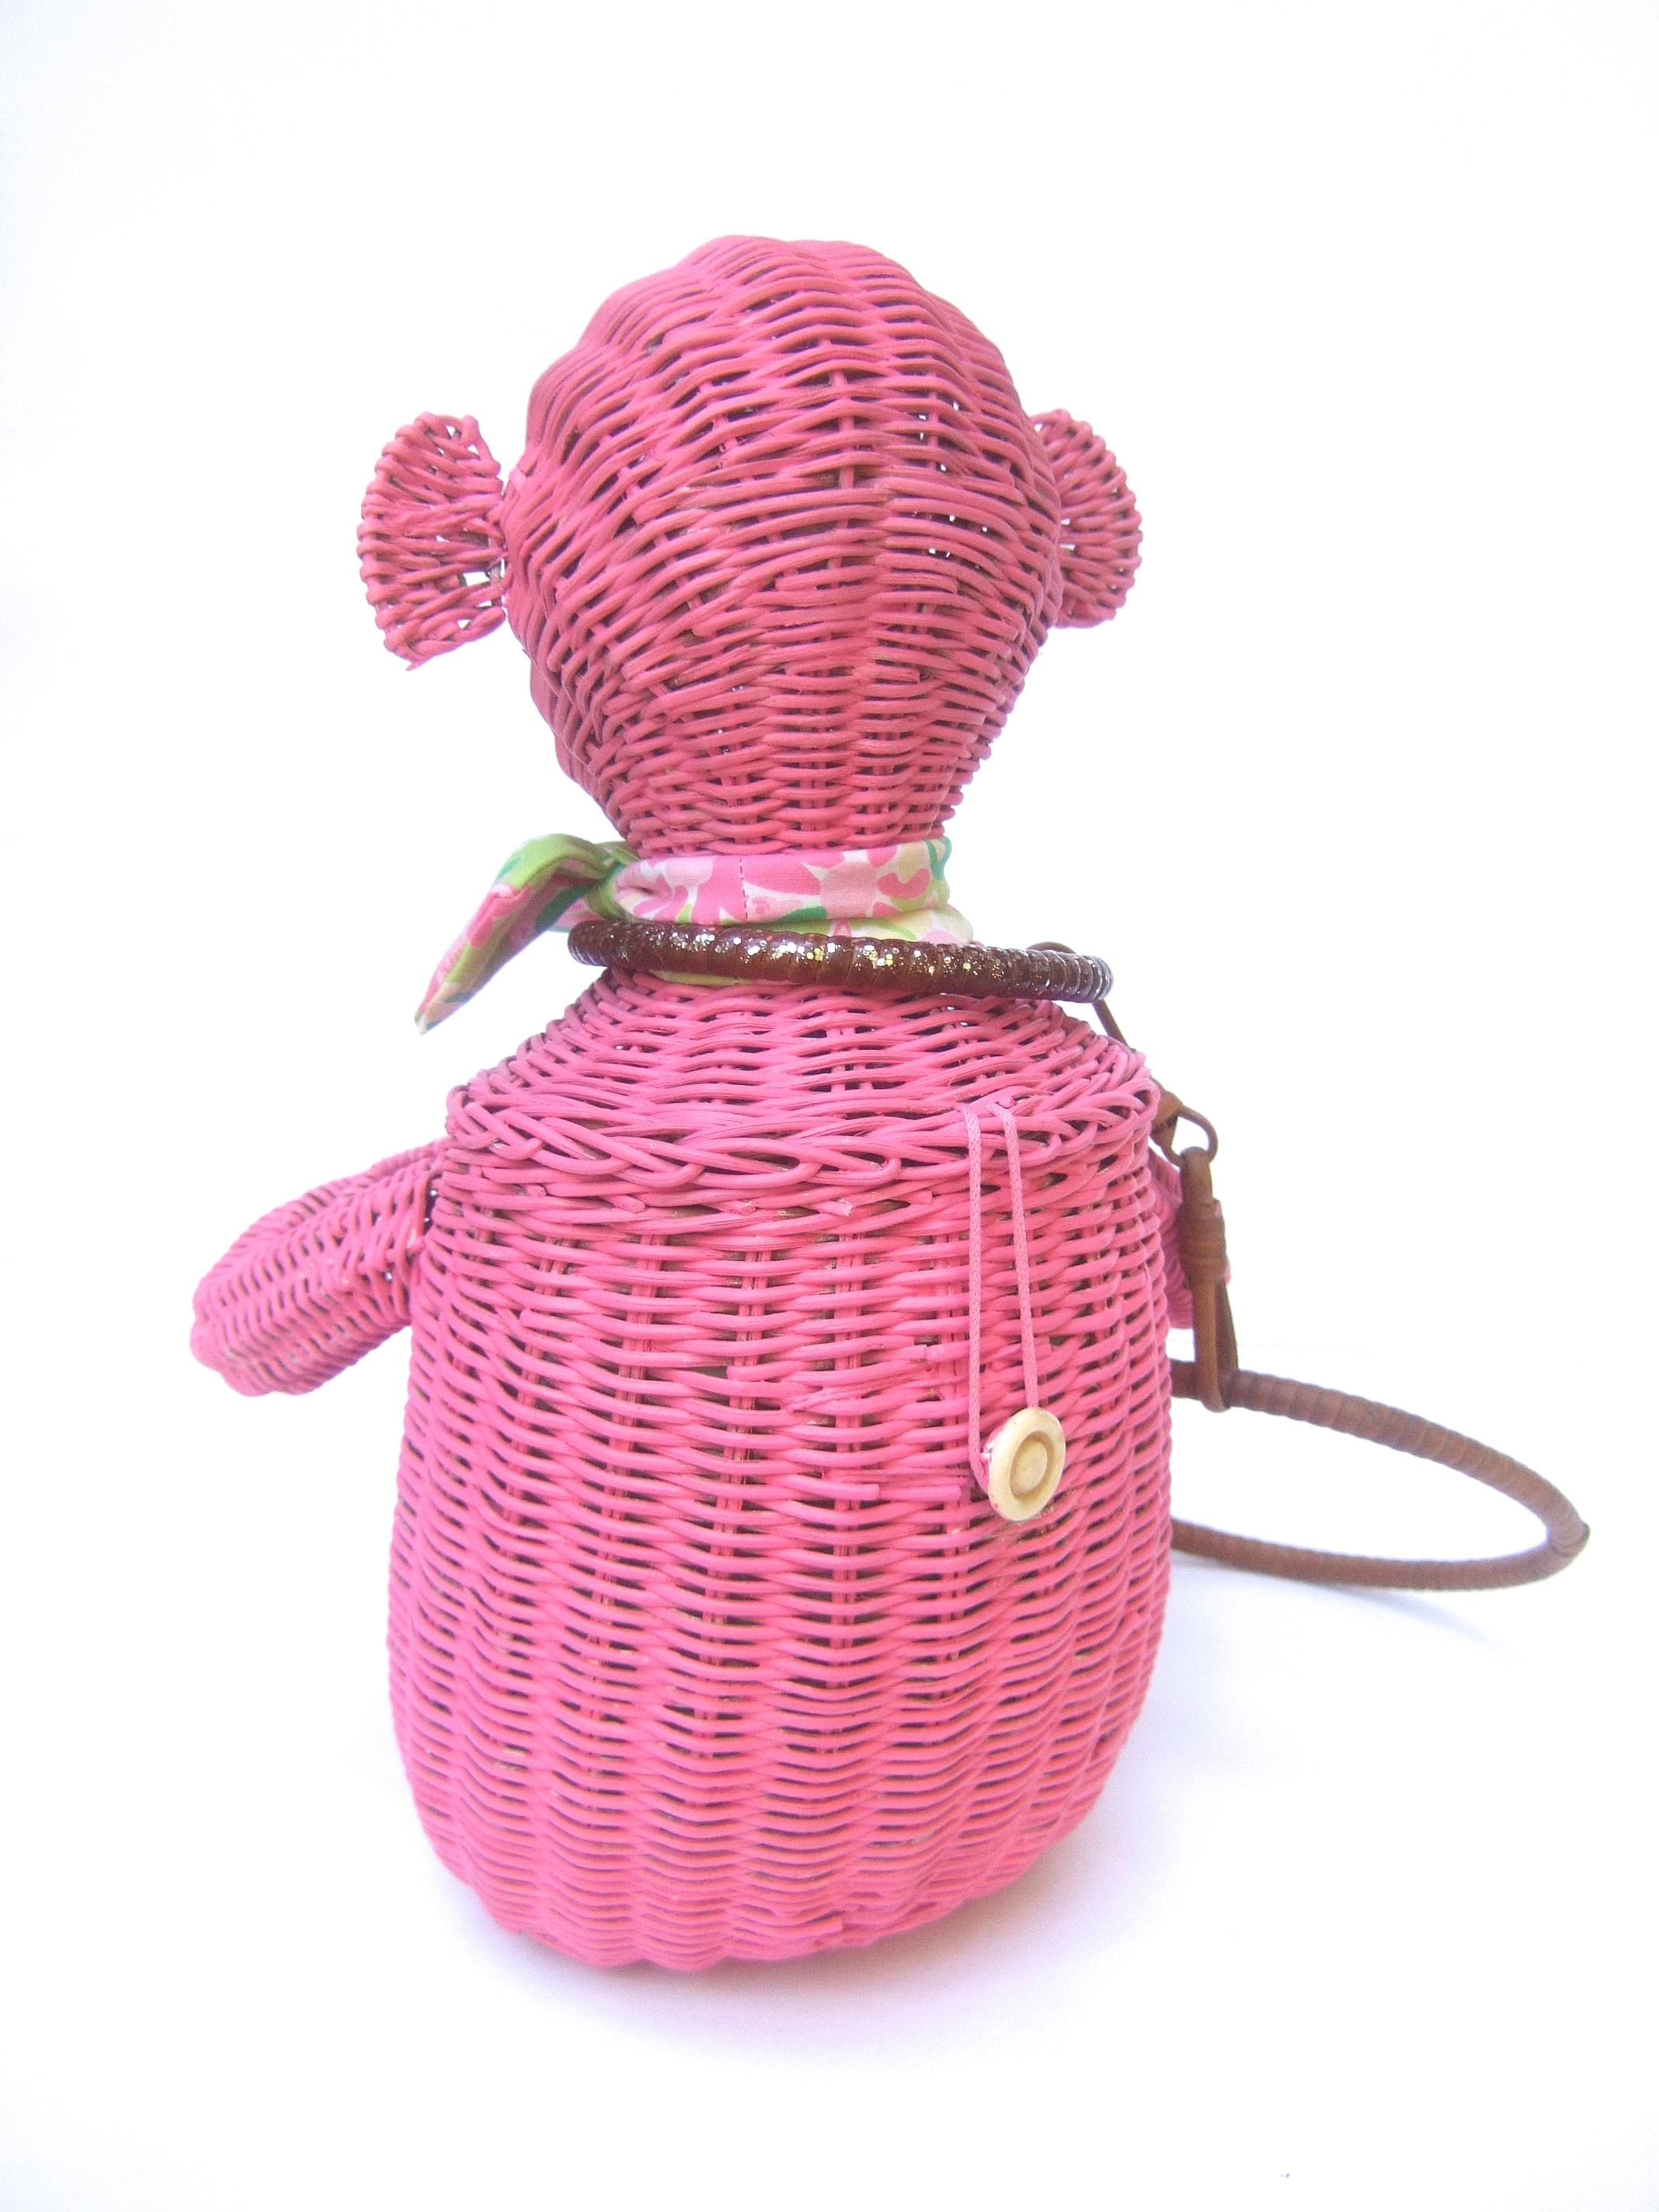 Whimsical Vintage Wicker Monkey Handbag With Lilly Pulitzer Fabric c 1950's  6